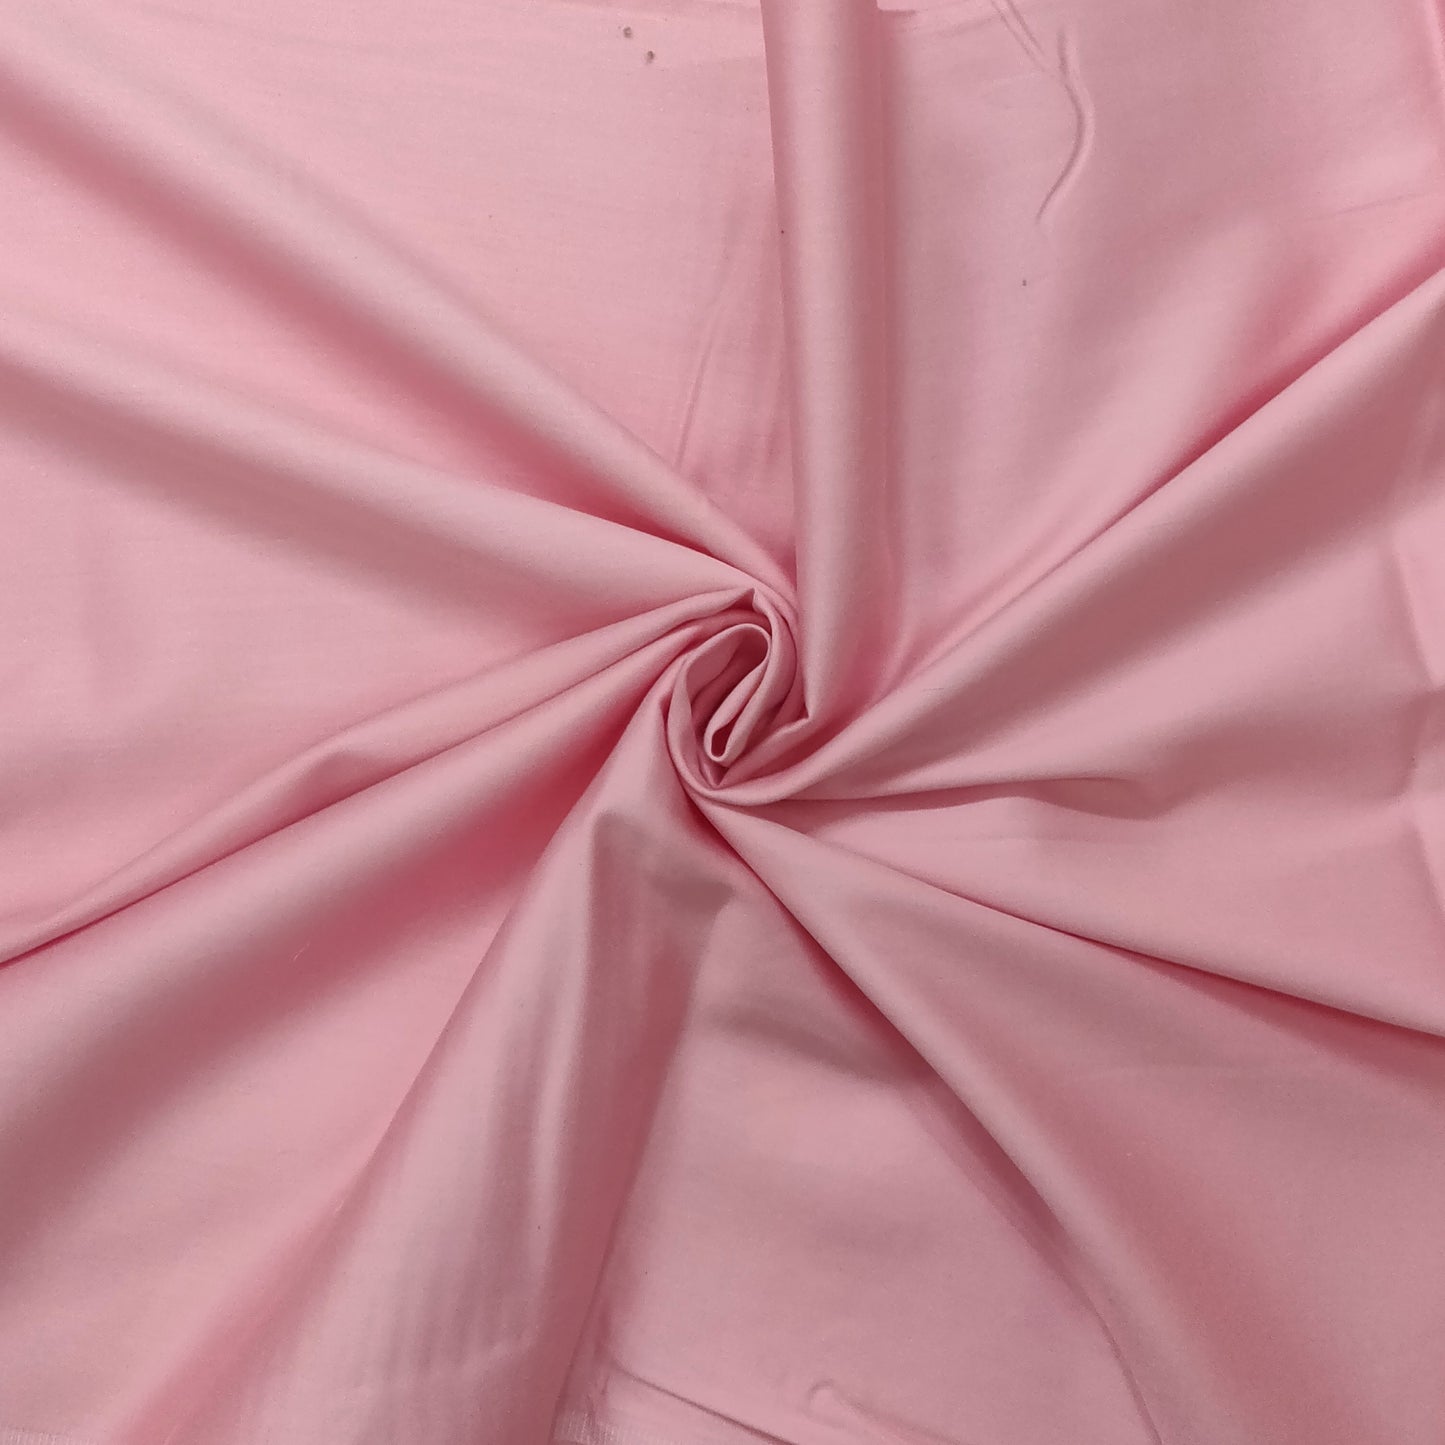 Solid Pink Cotton Satin Fabric 42 Inches Plain Weave TU-7407